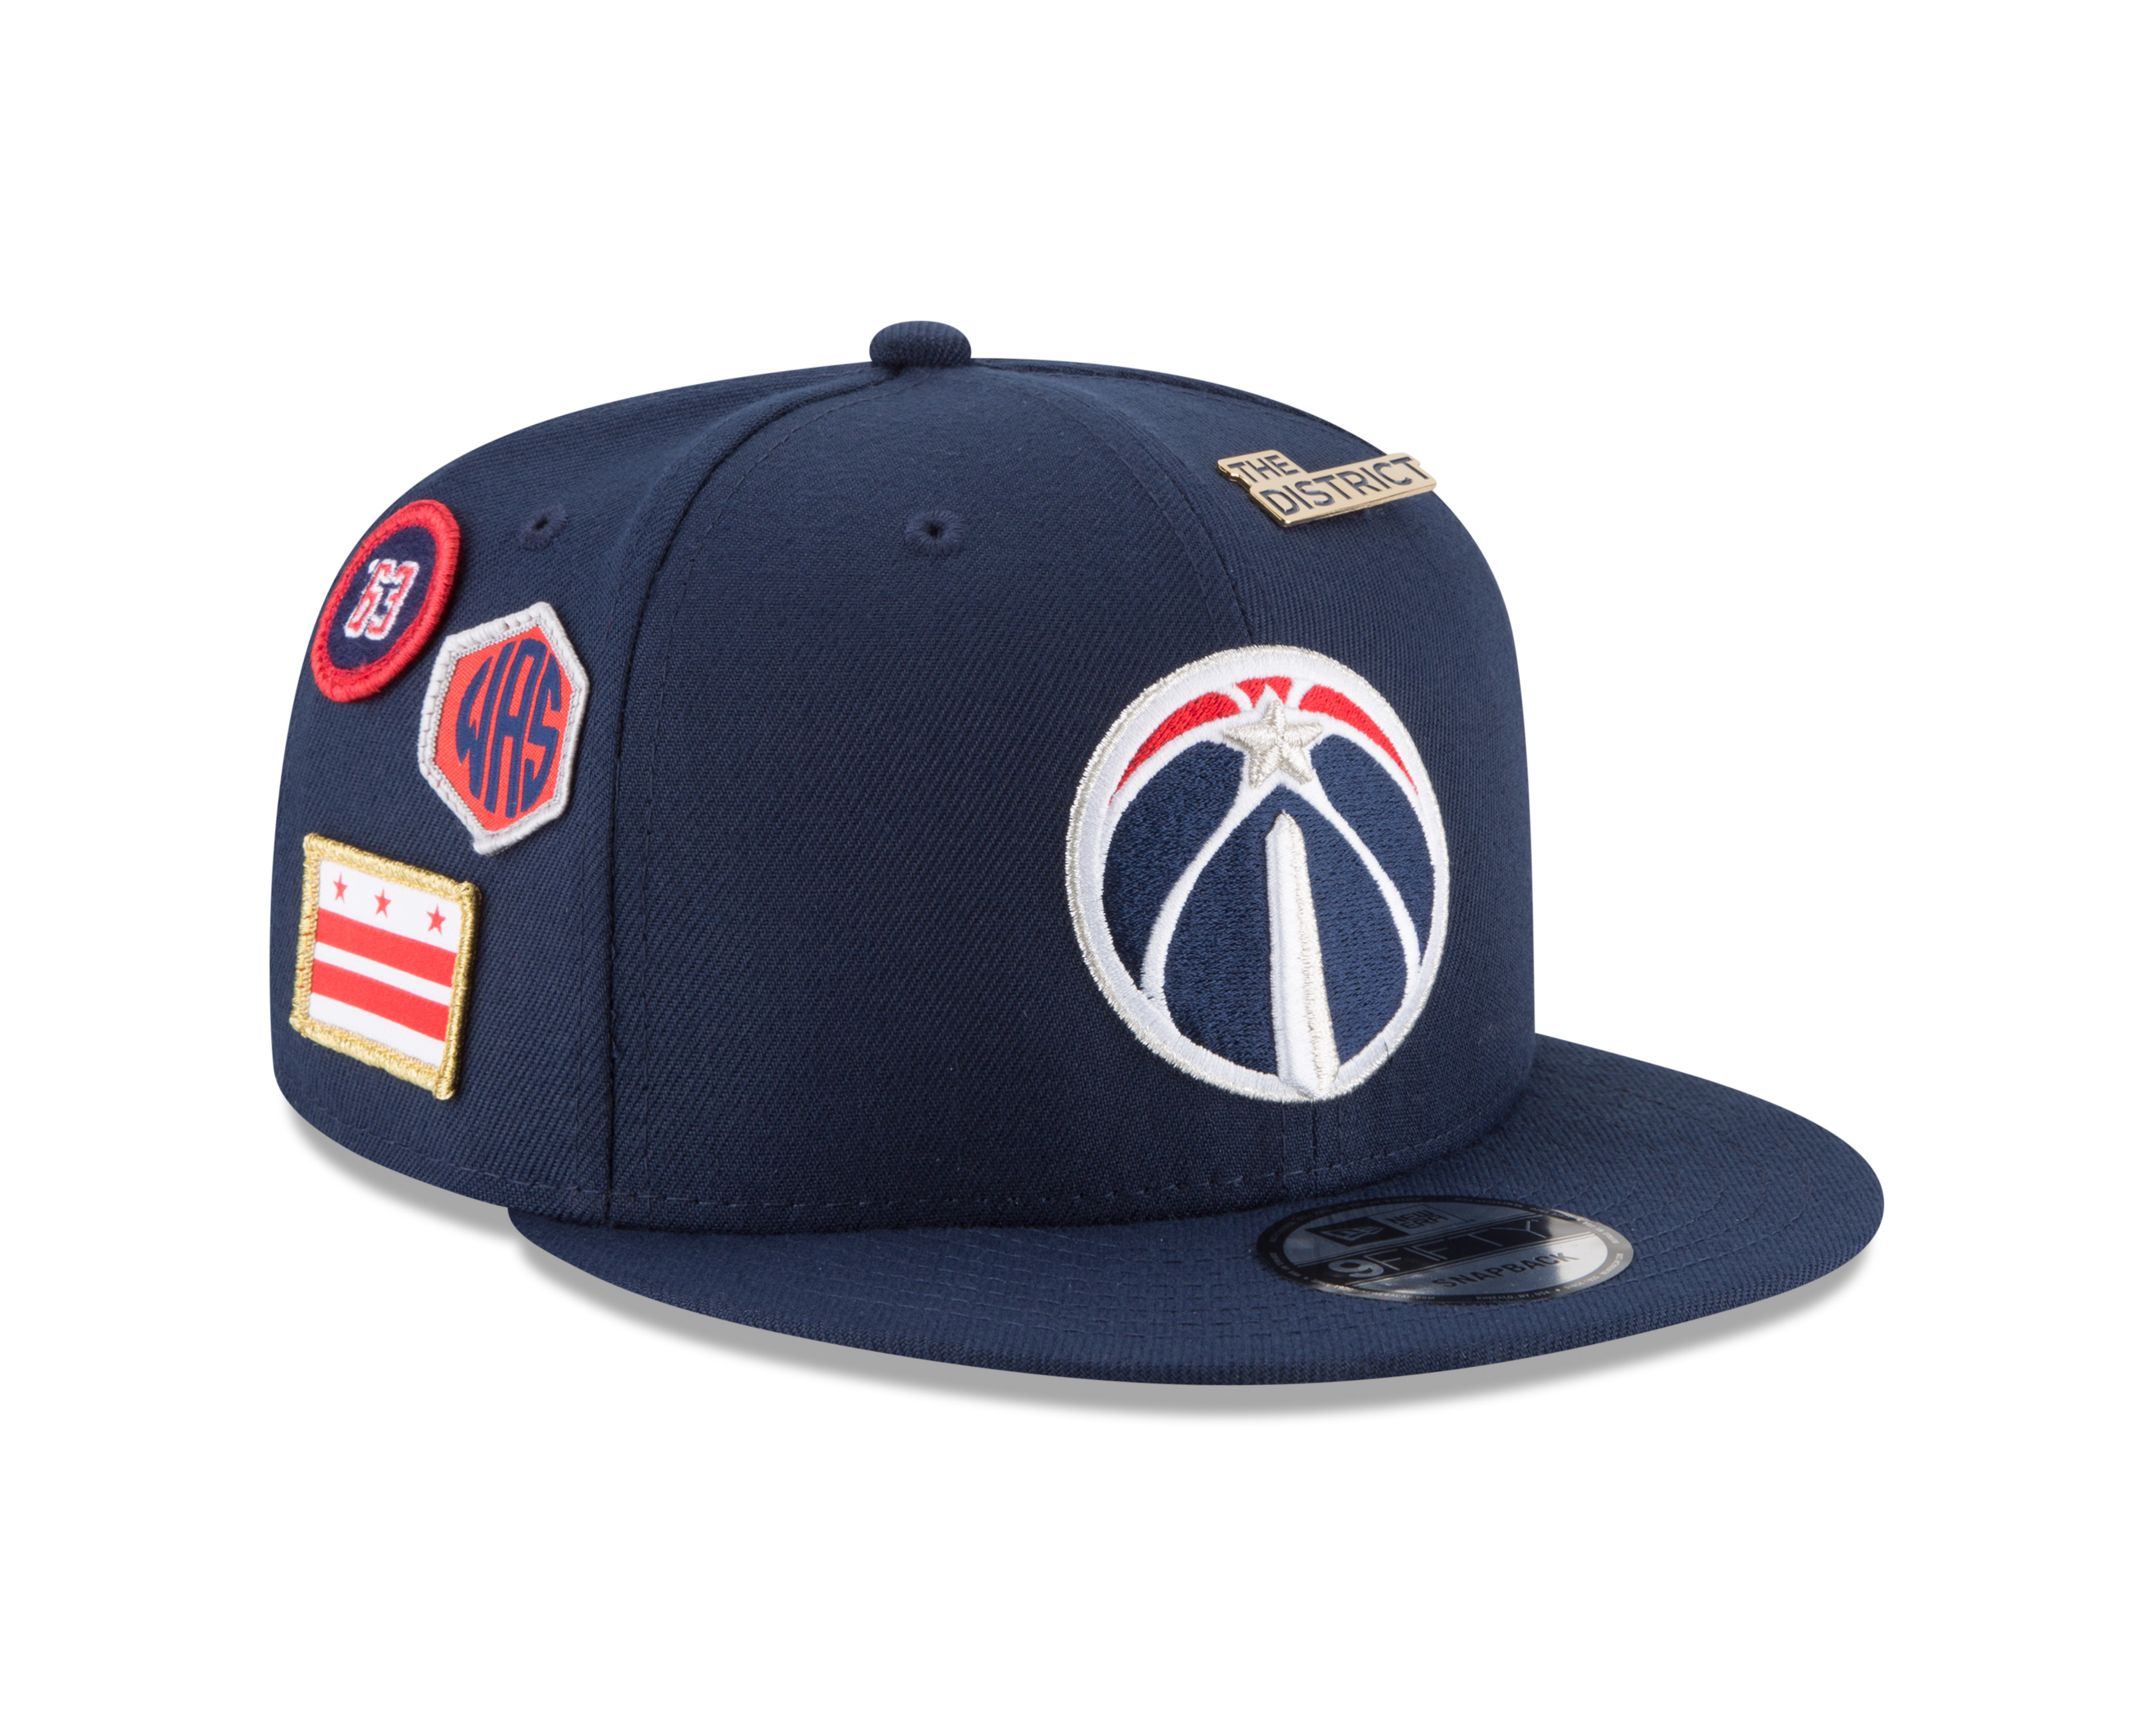 New Era Released Its Line Of Team Hats For The 2018 NBA Draft